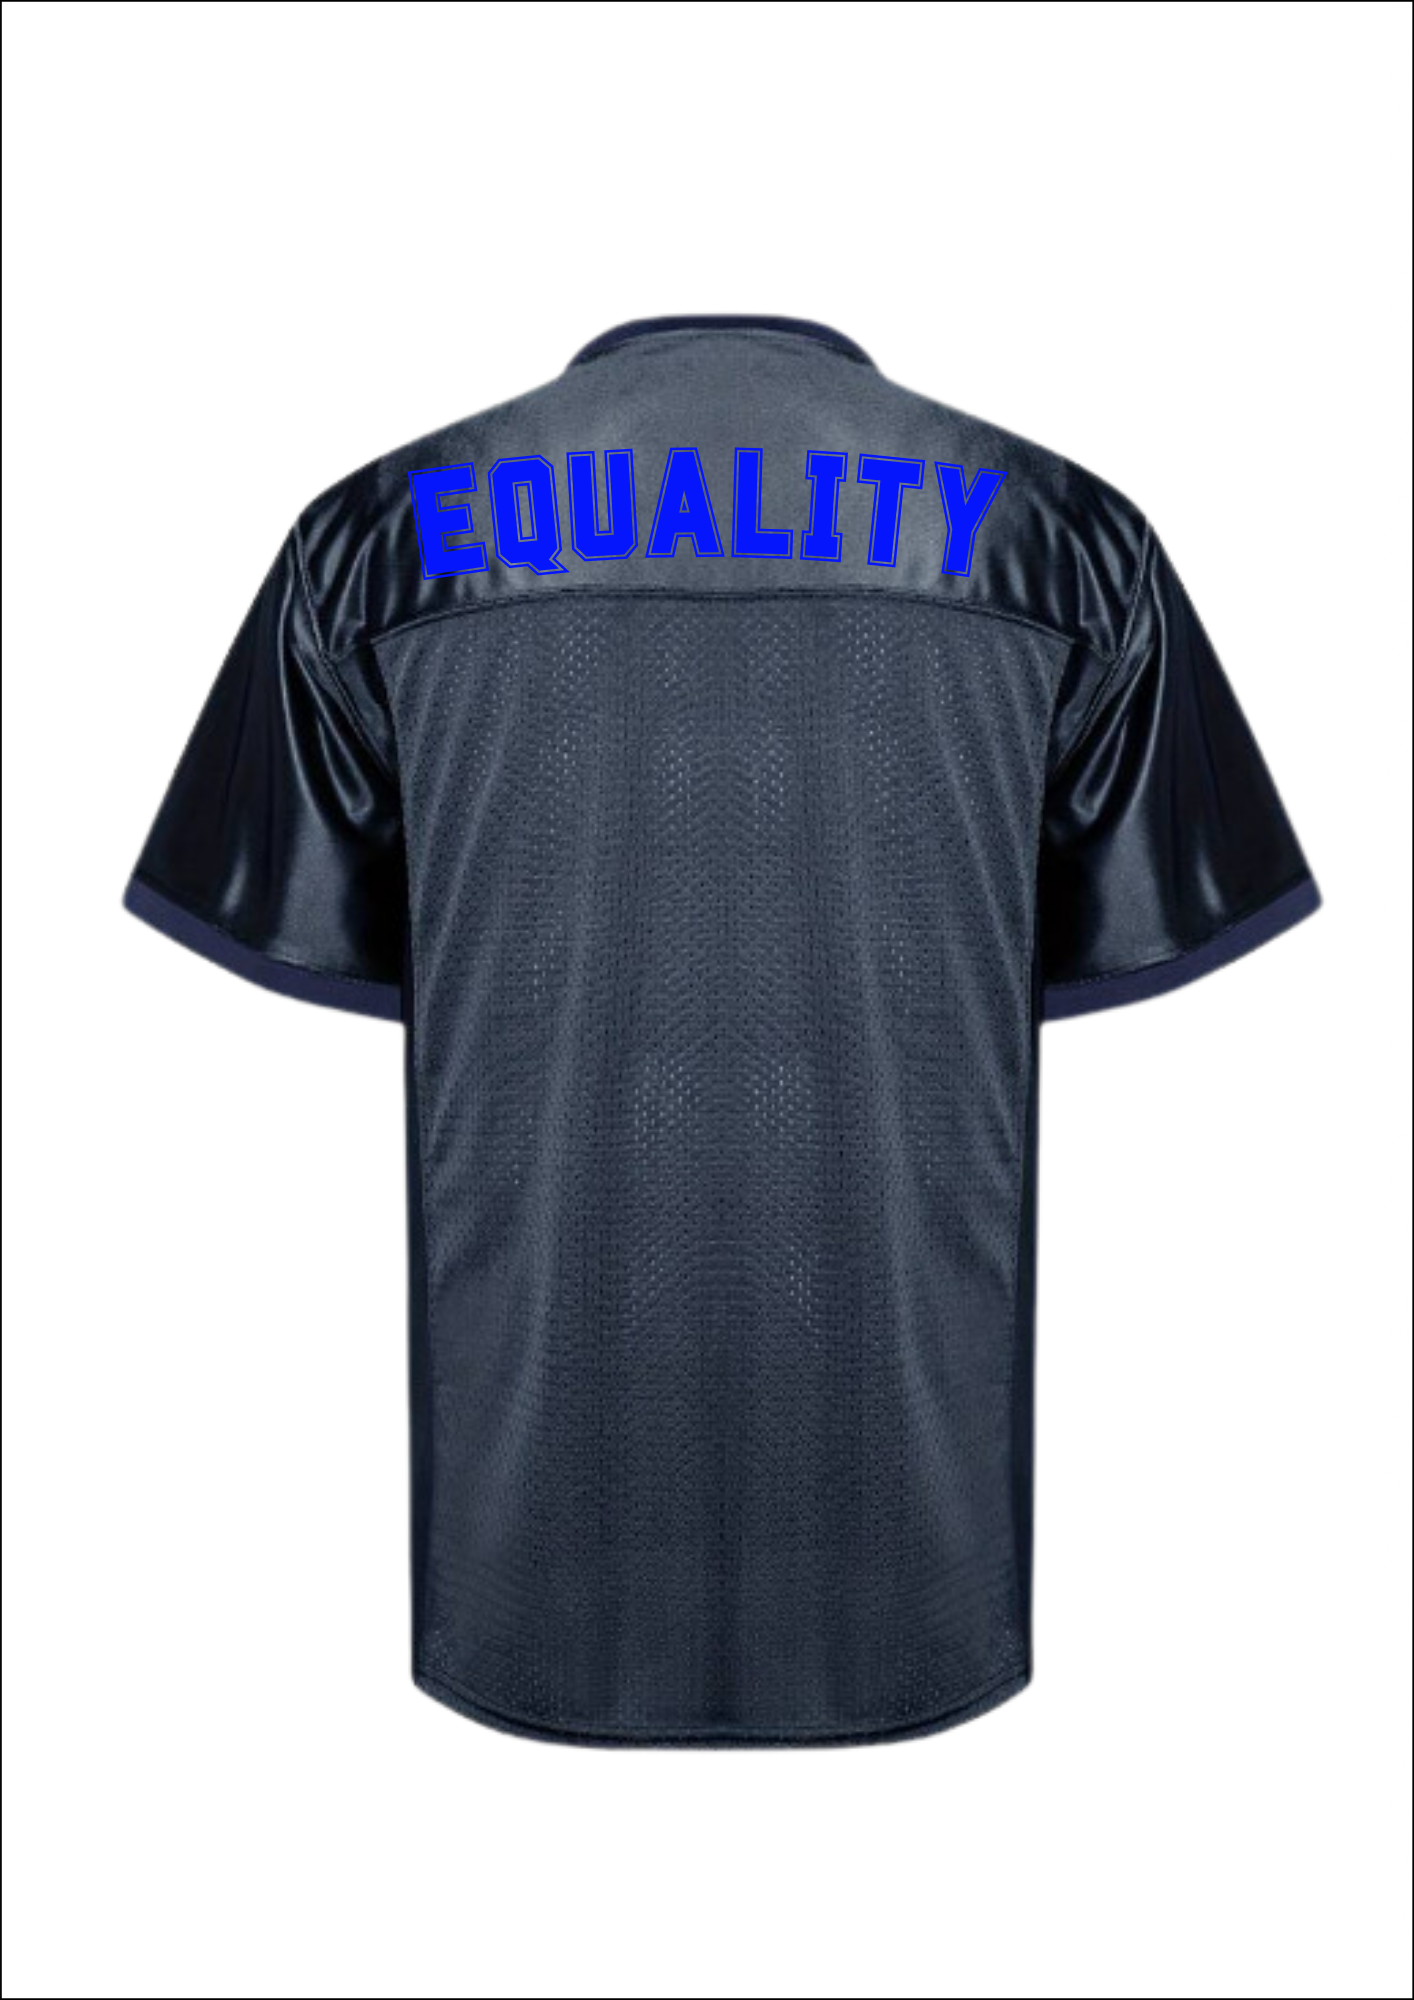 Football jersey EQUALITY navy